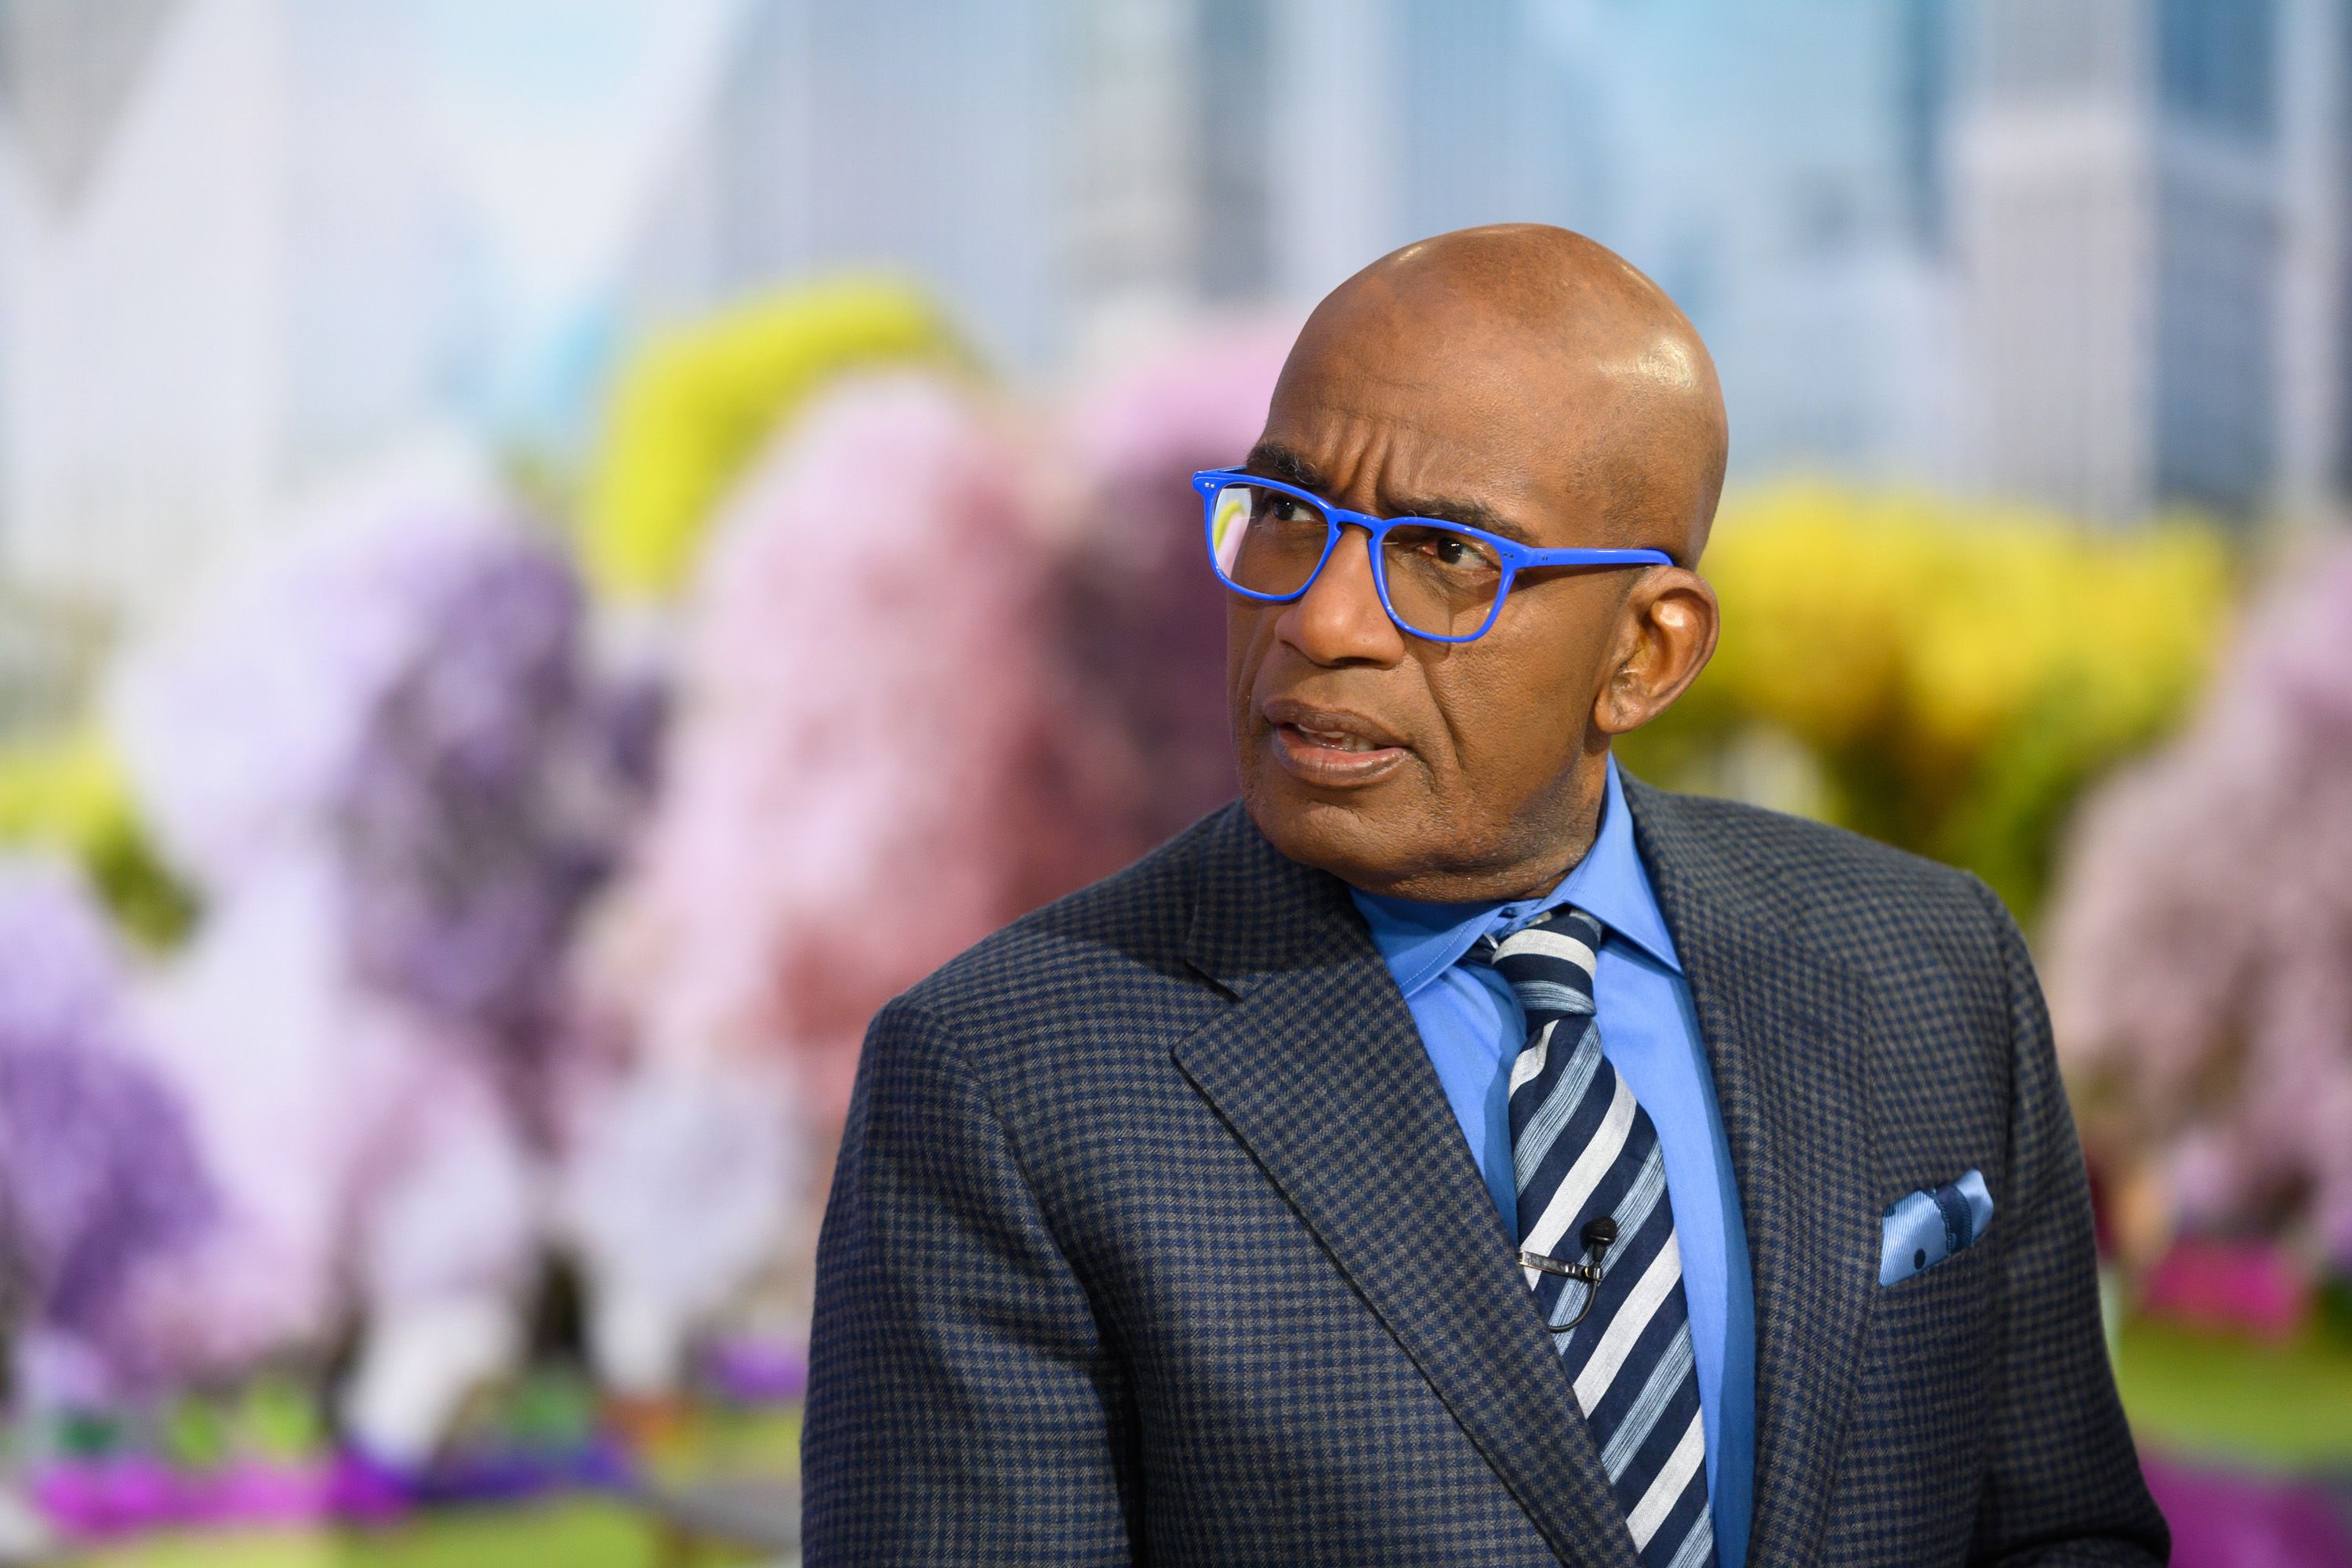 Al Roker at Today - Season 68 on Wednesday, March 27, 2019 | Photo: Getty Images